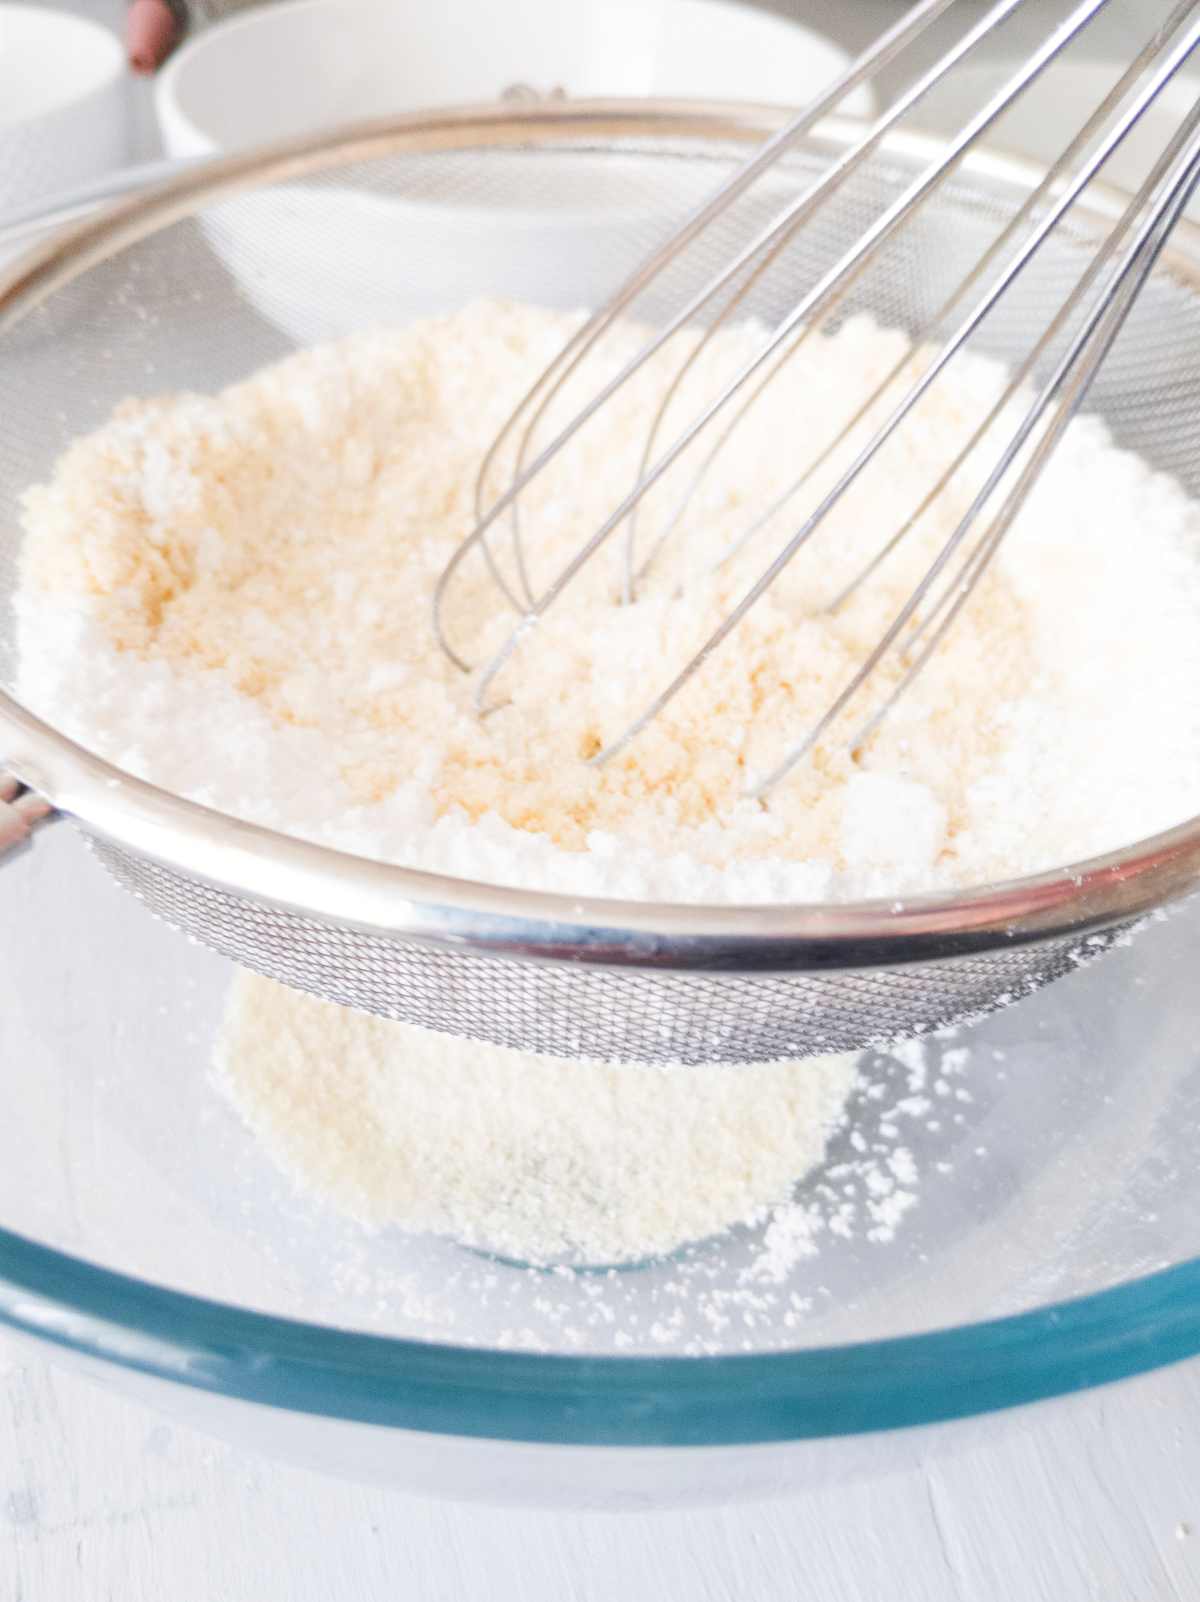 Sieving almond flour and powdered sugar over a glass bowl with a whisk.